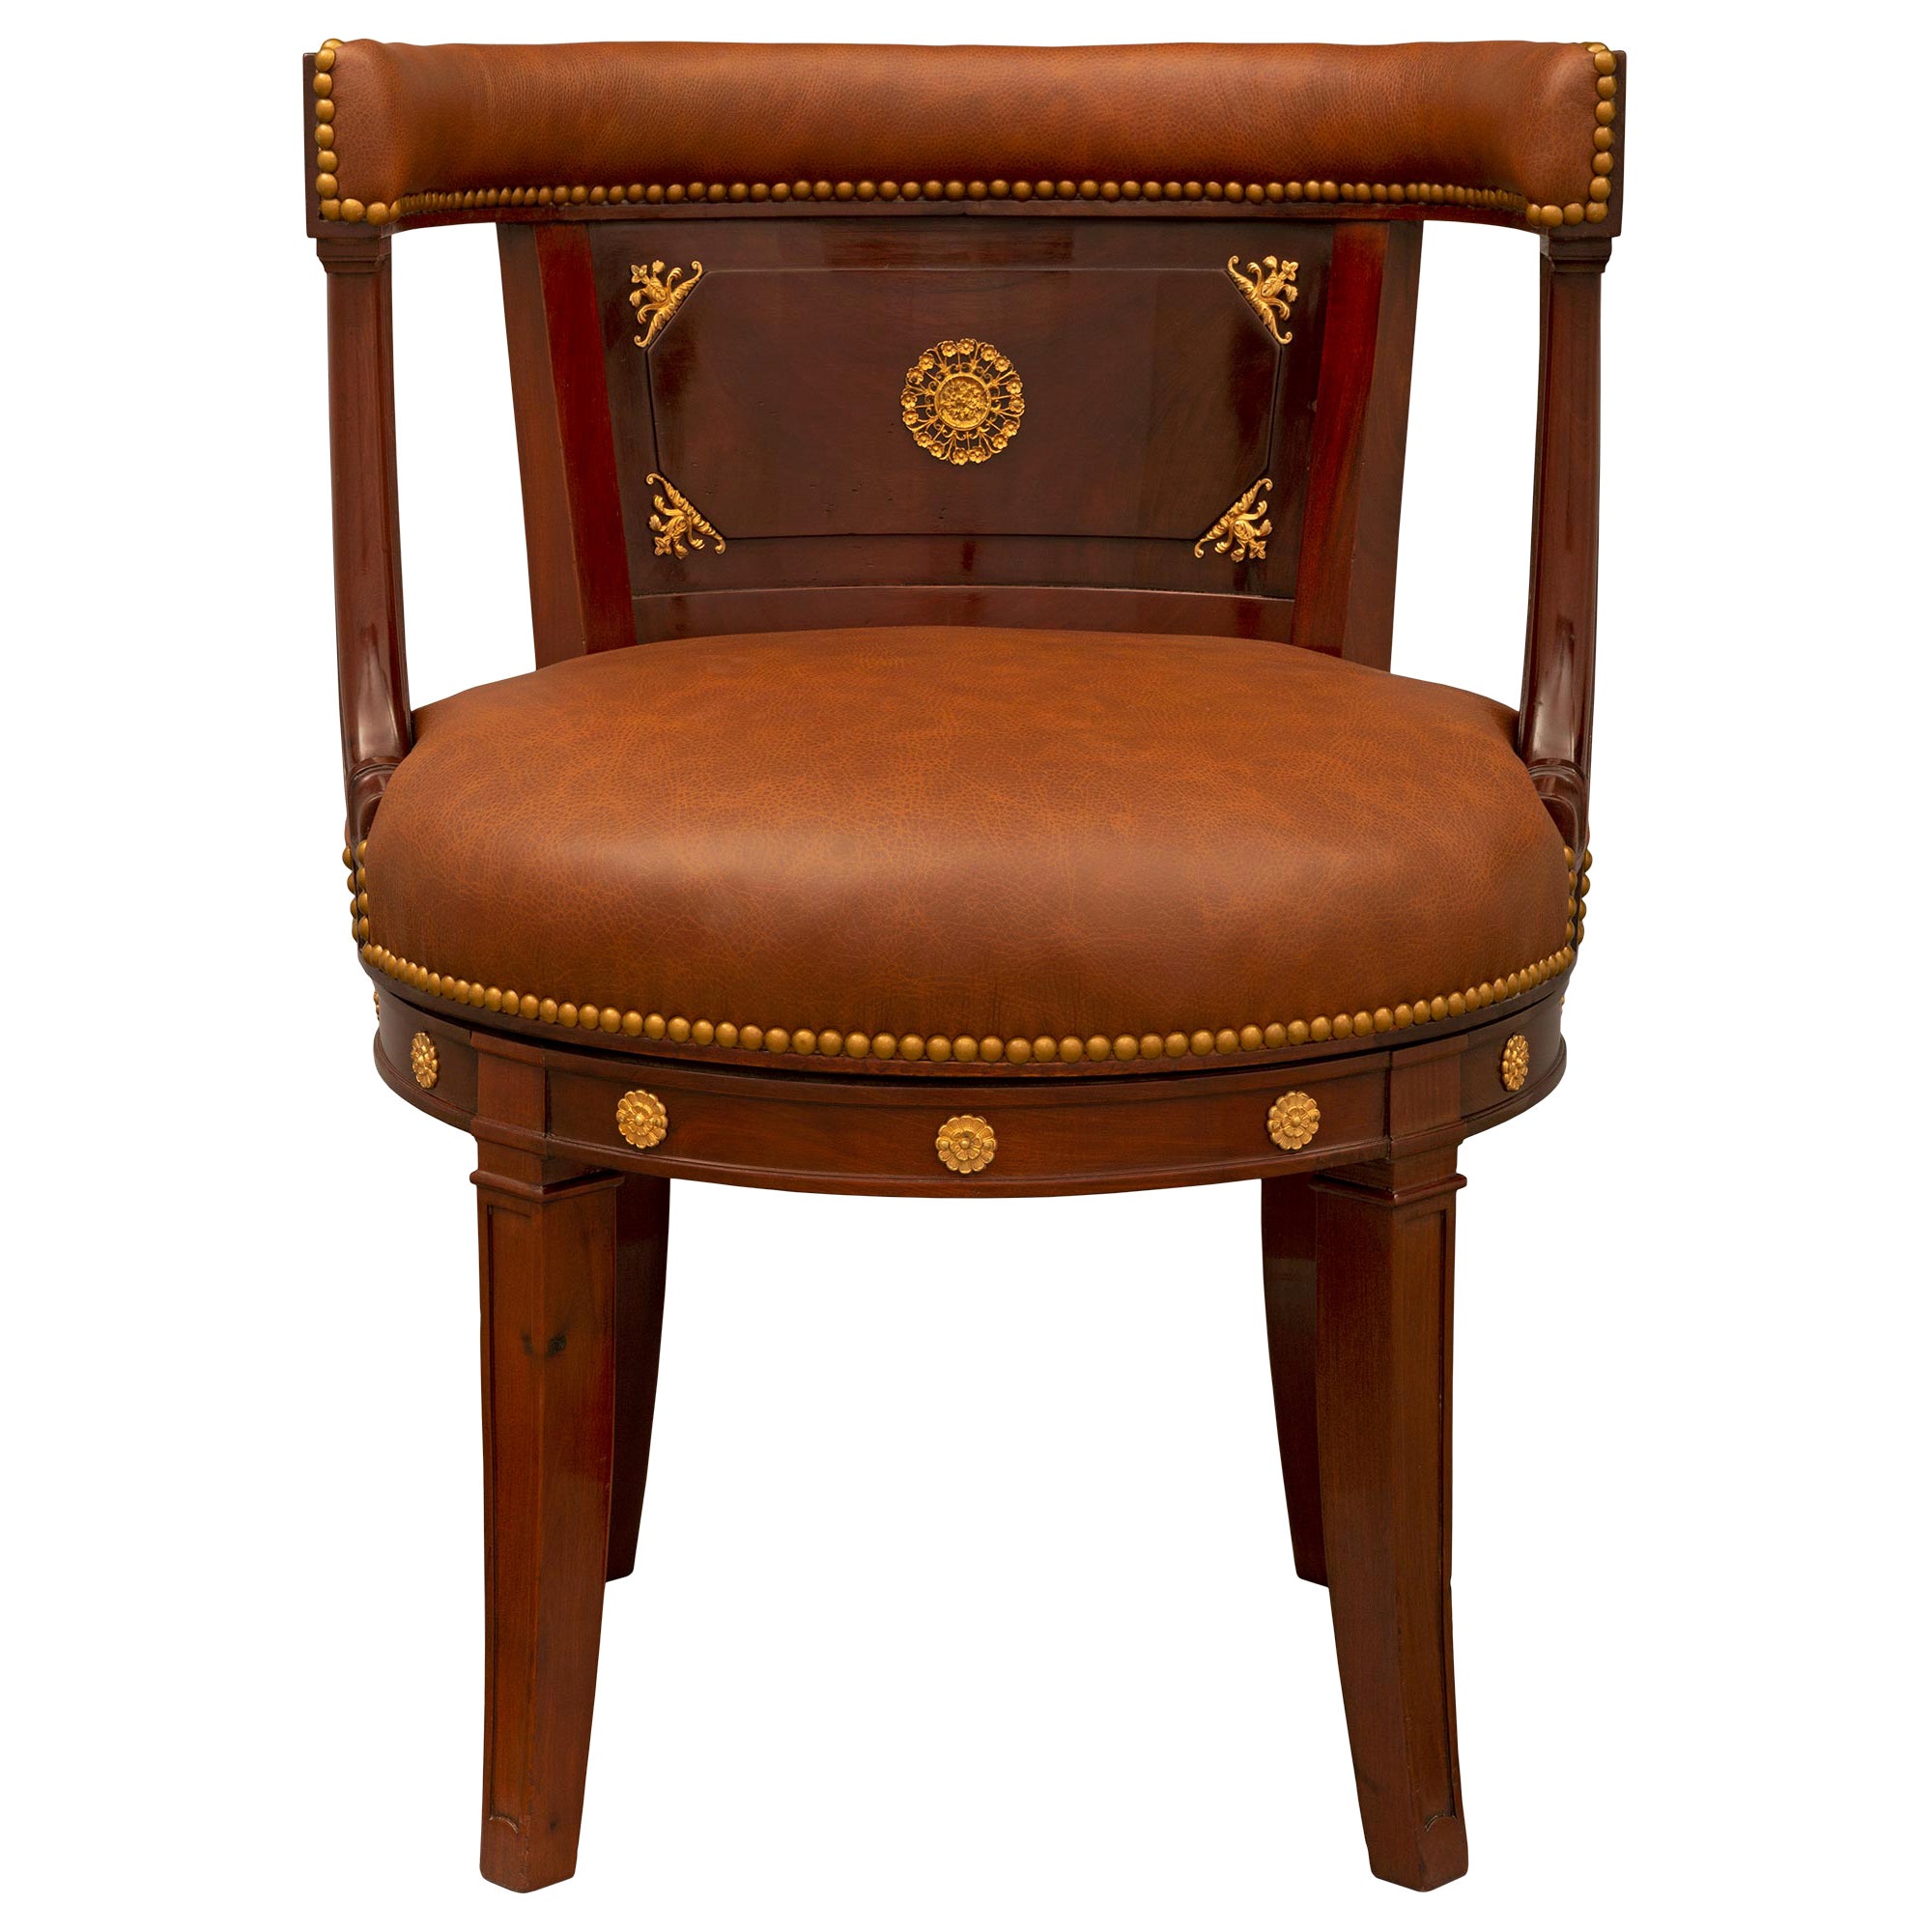 French 19th Century Empire St. Mahogany and Ormolu Desk Armchair For Sale